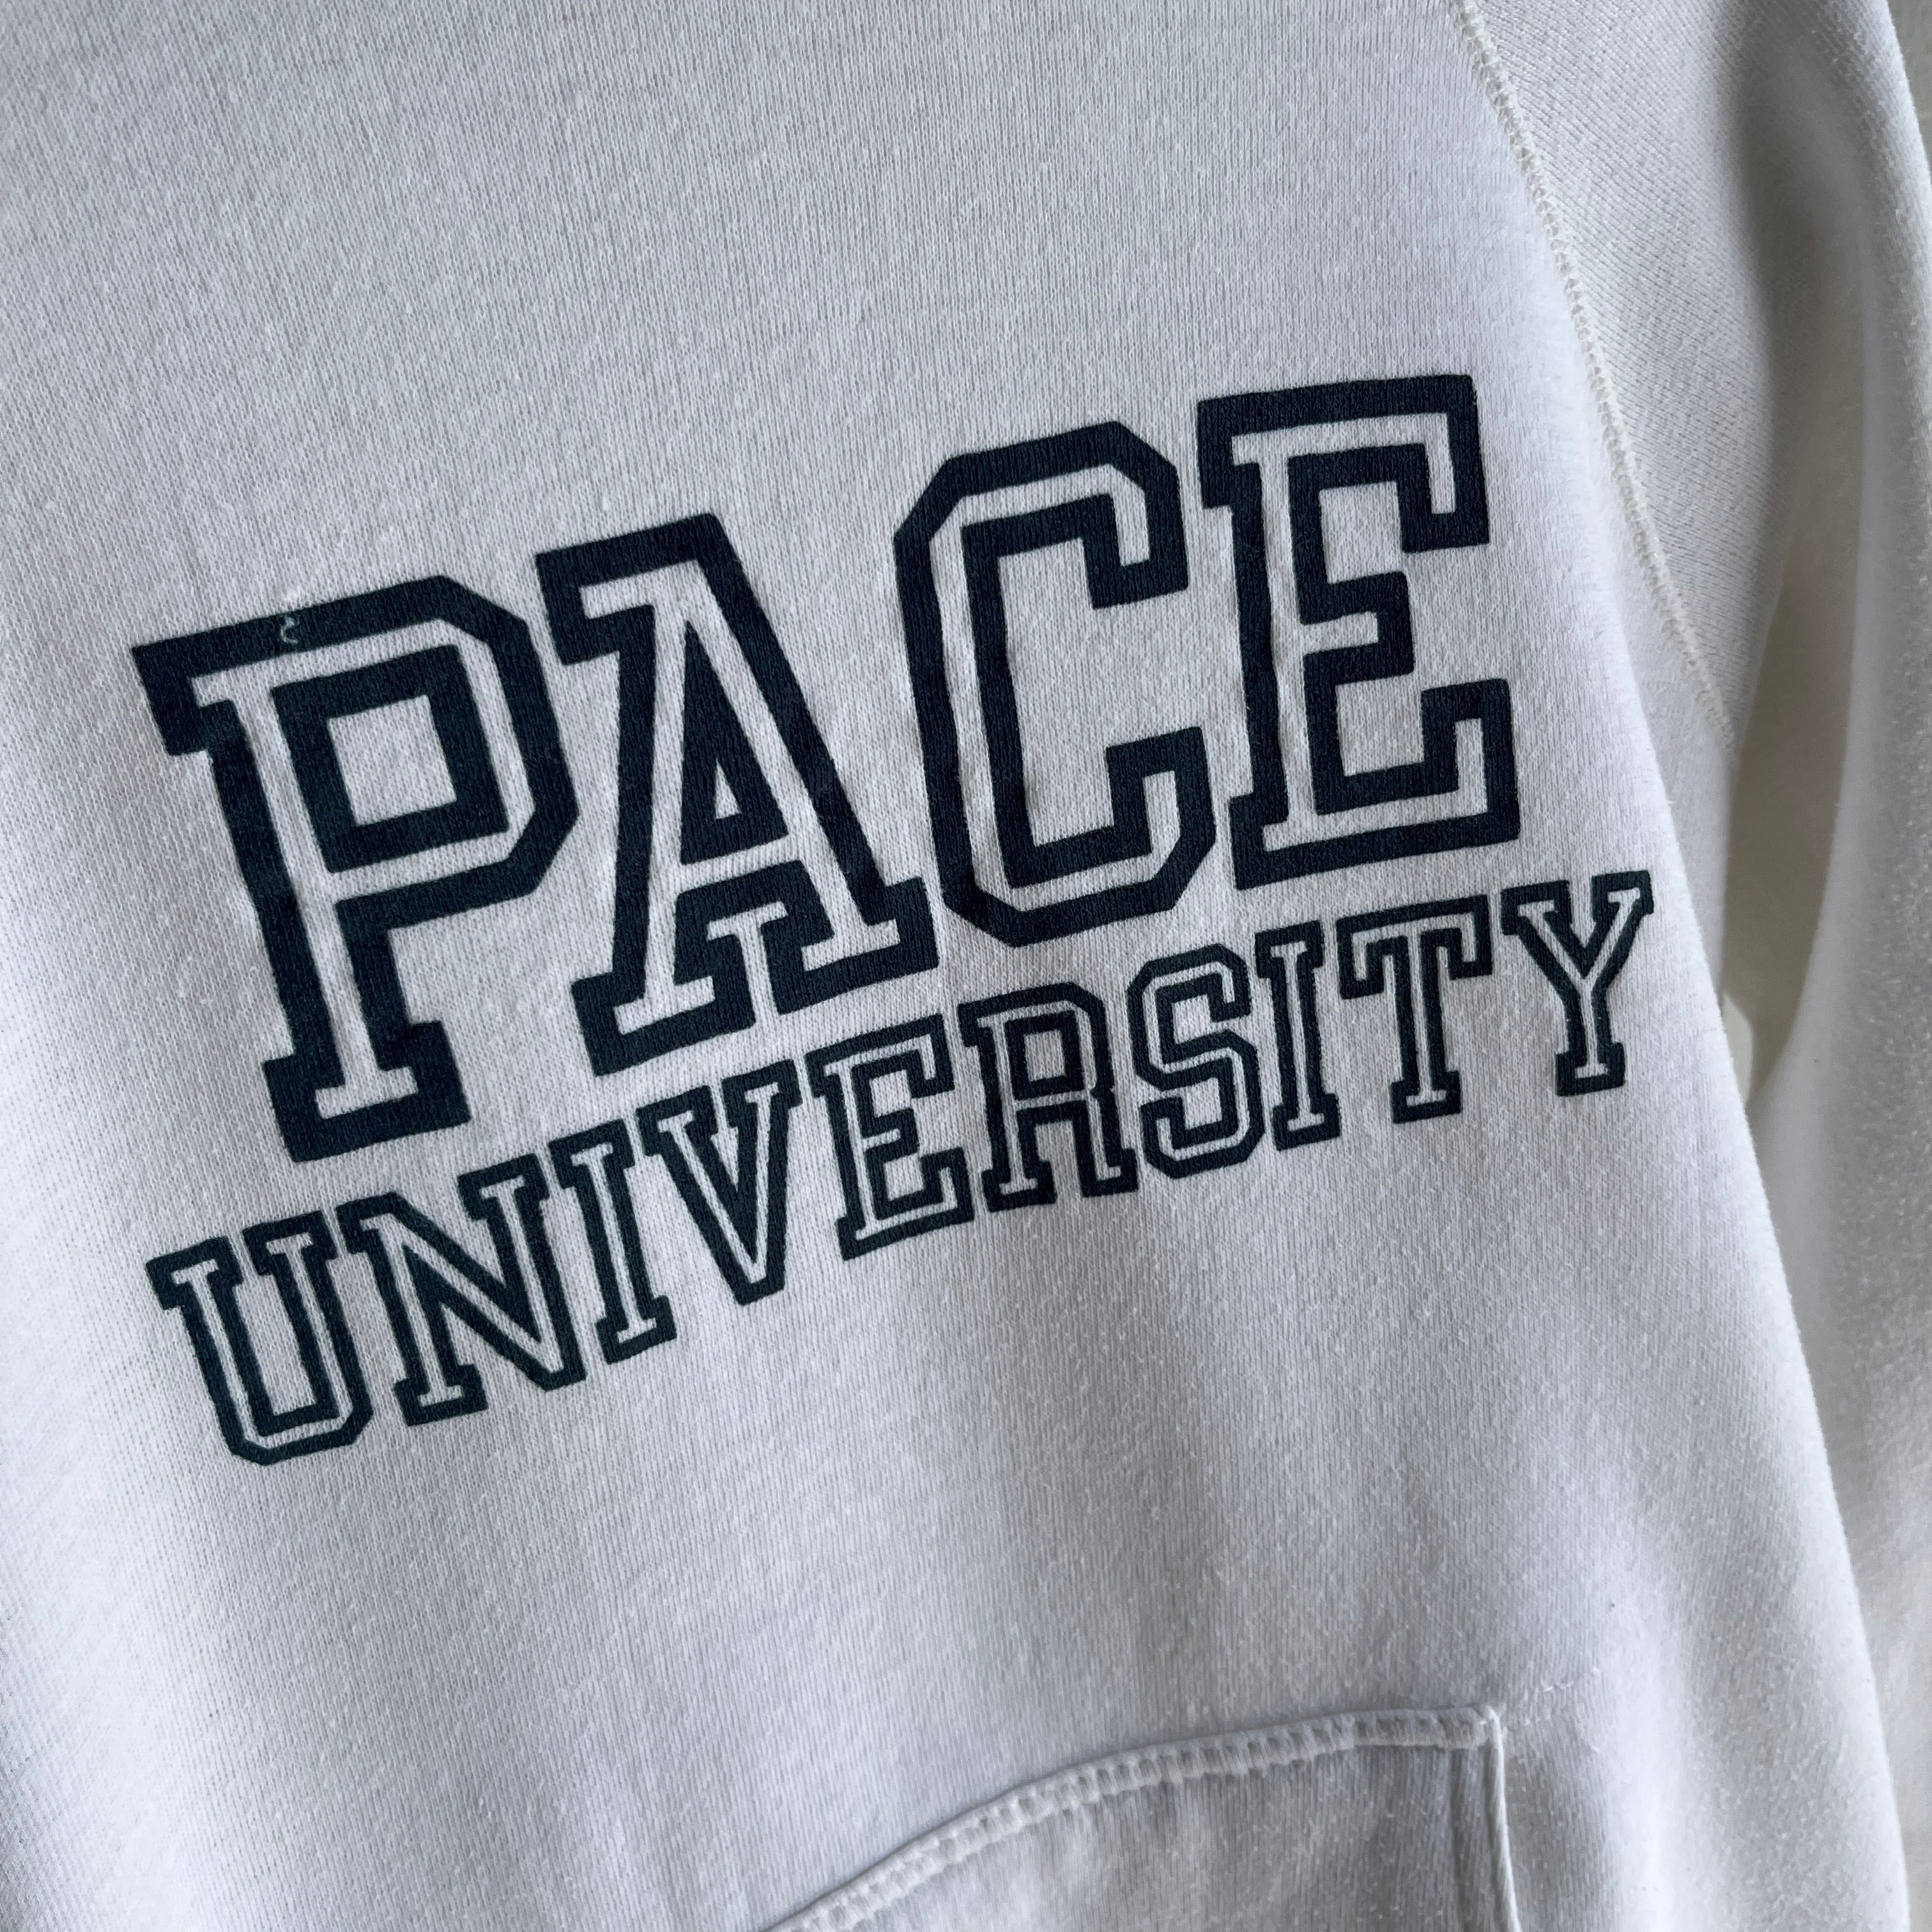 1980s Pace University Pullover Hoodie